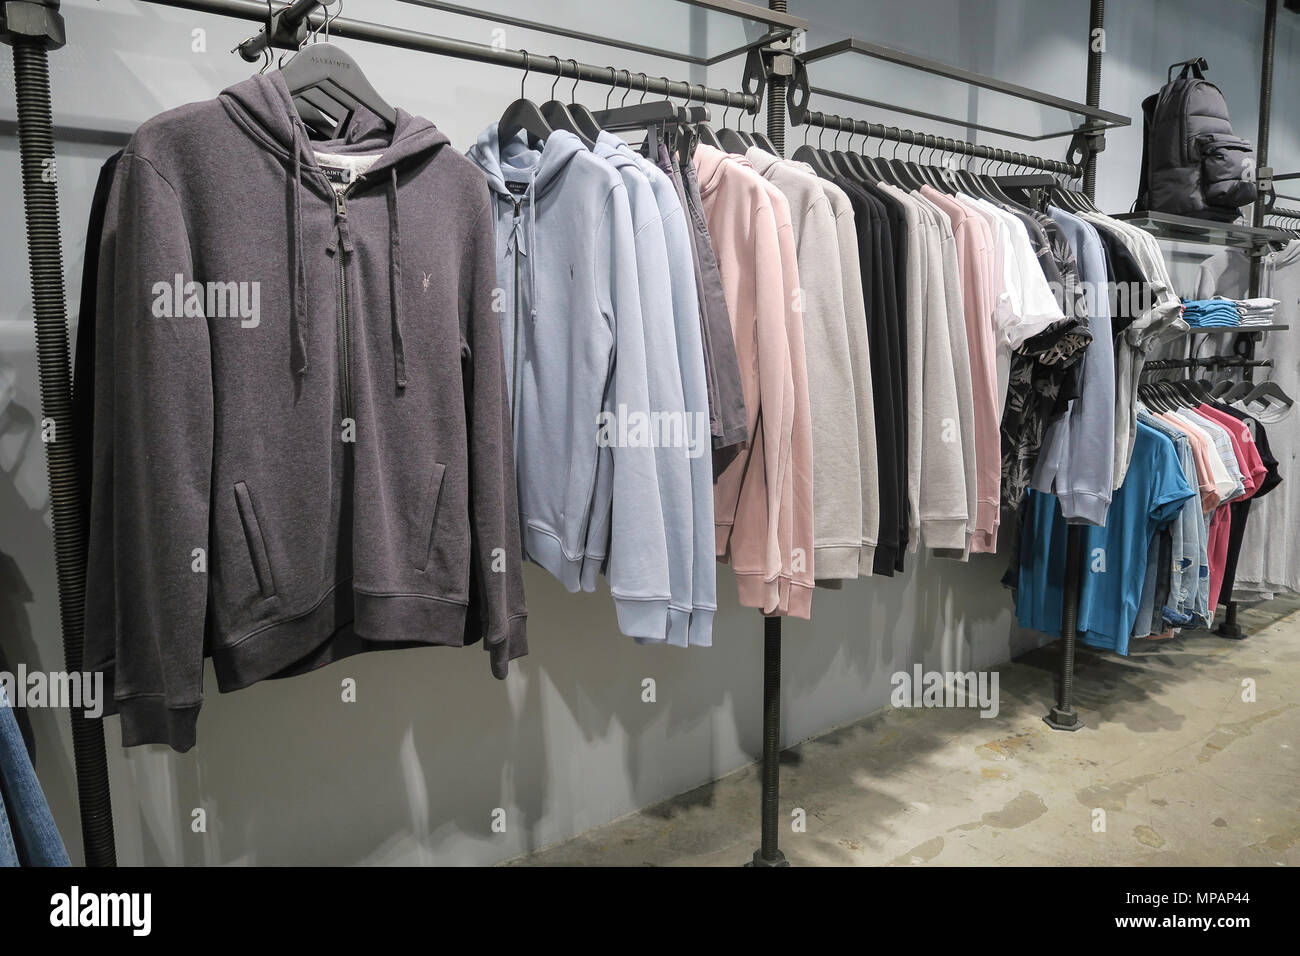 Allsaints clothing store hi-res stock photography and images - Alamy